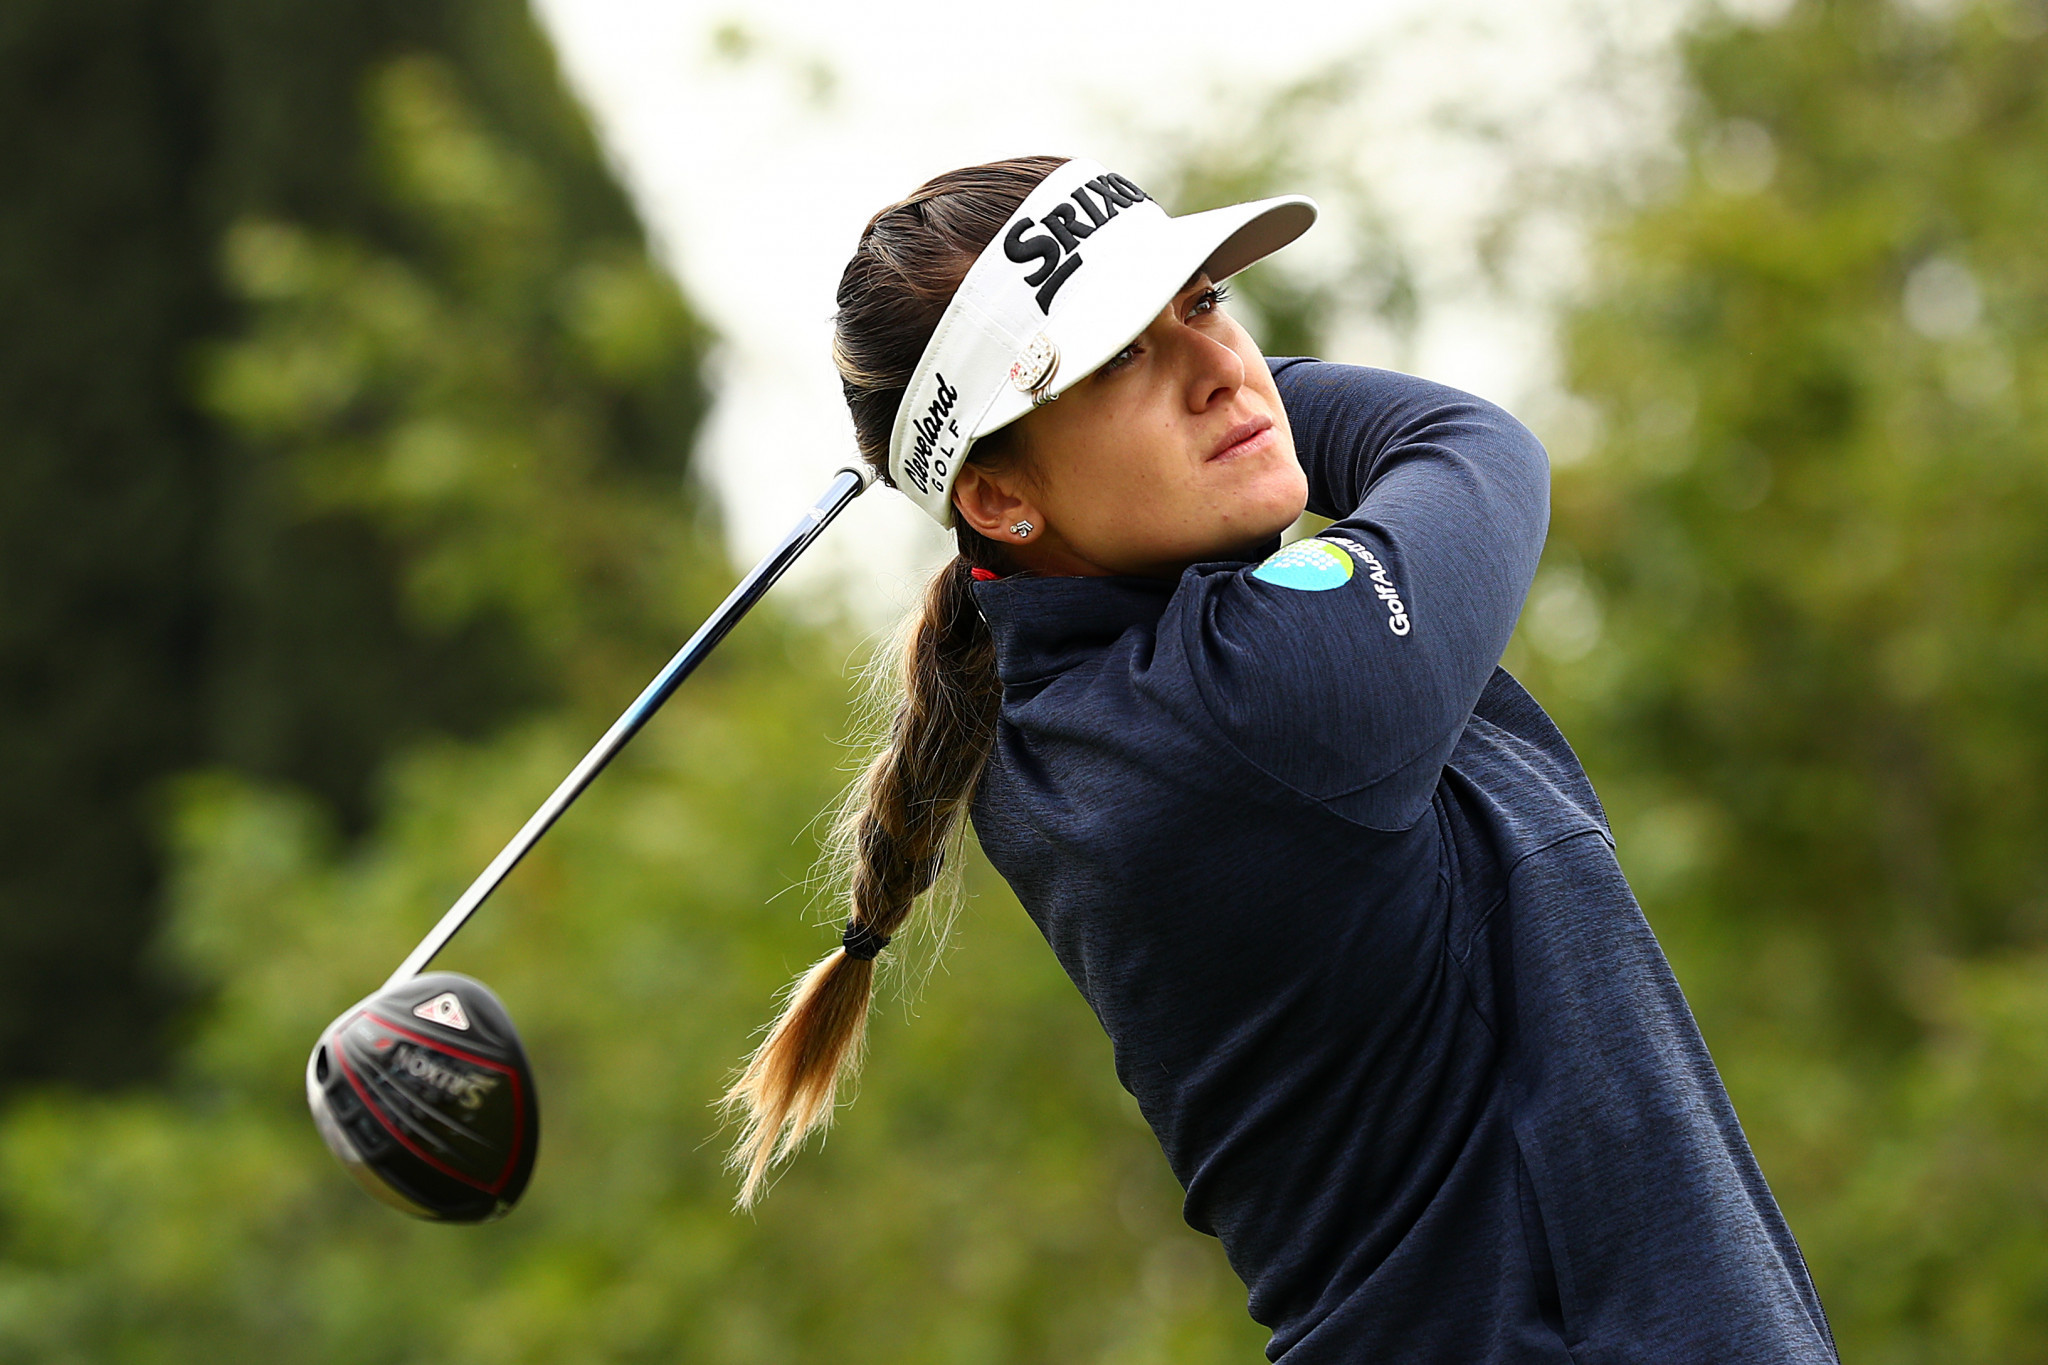 Australia's Green leads by one stroke after wet opening day at Women's PGA Championship